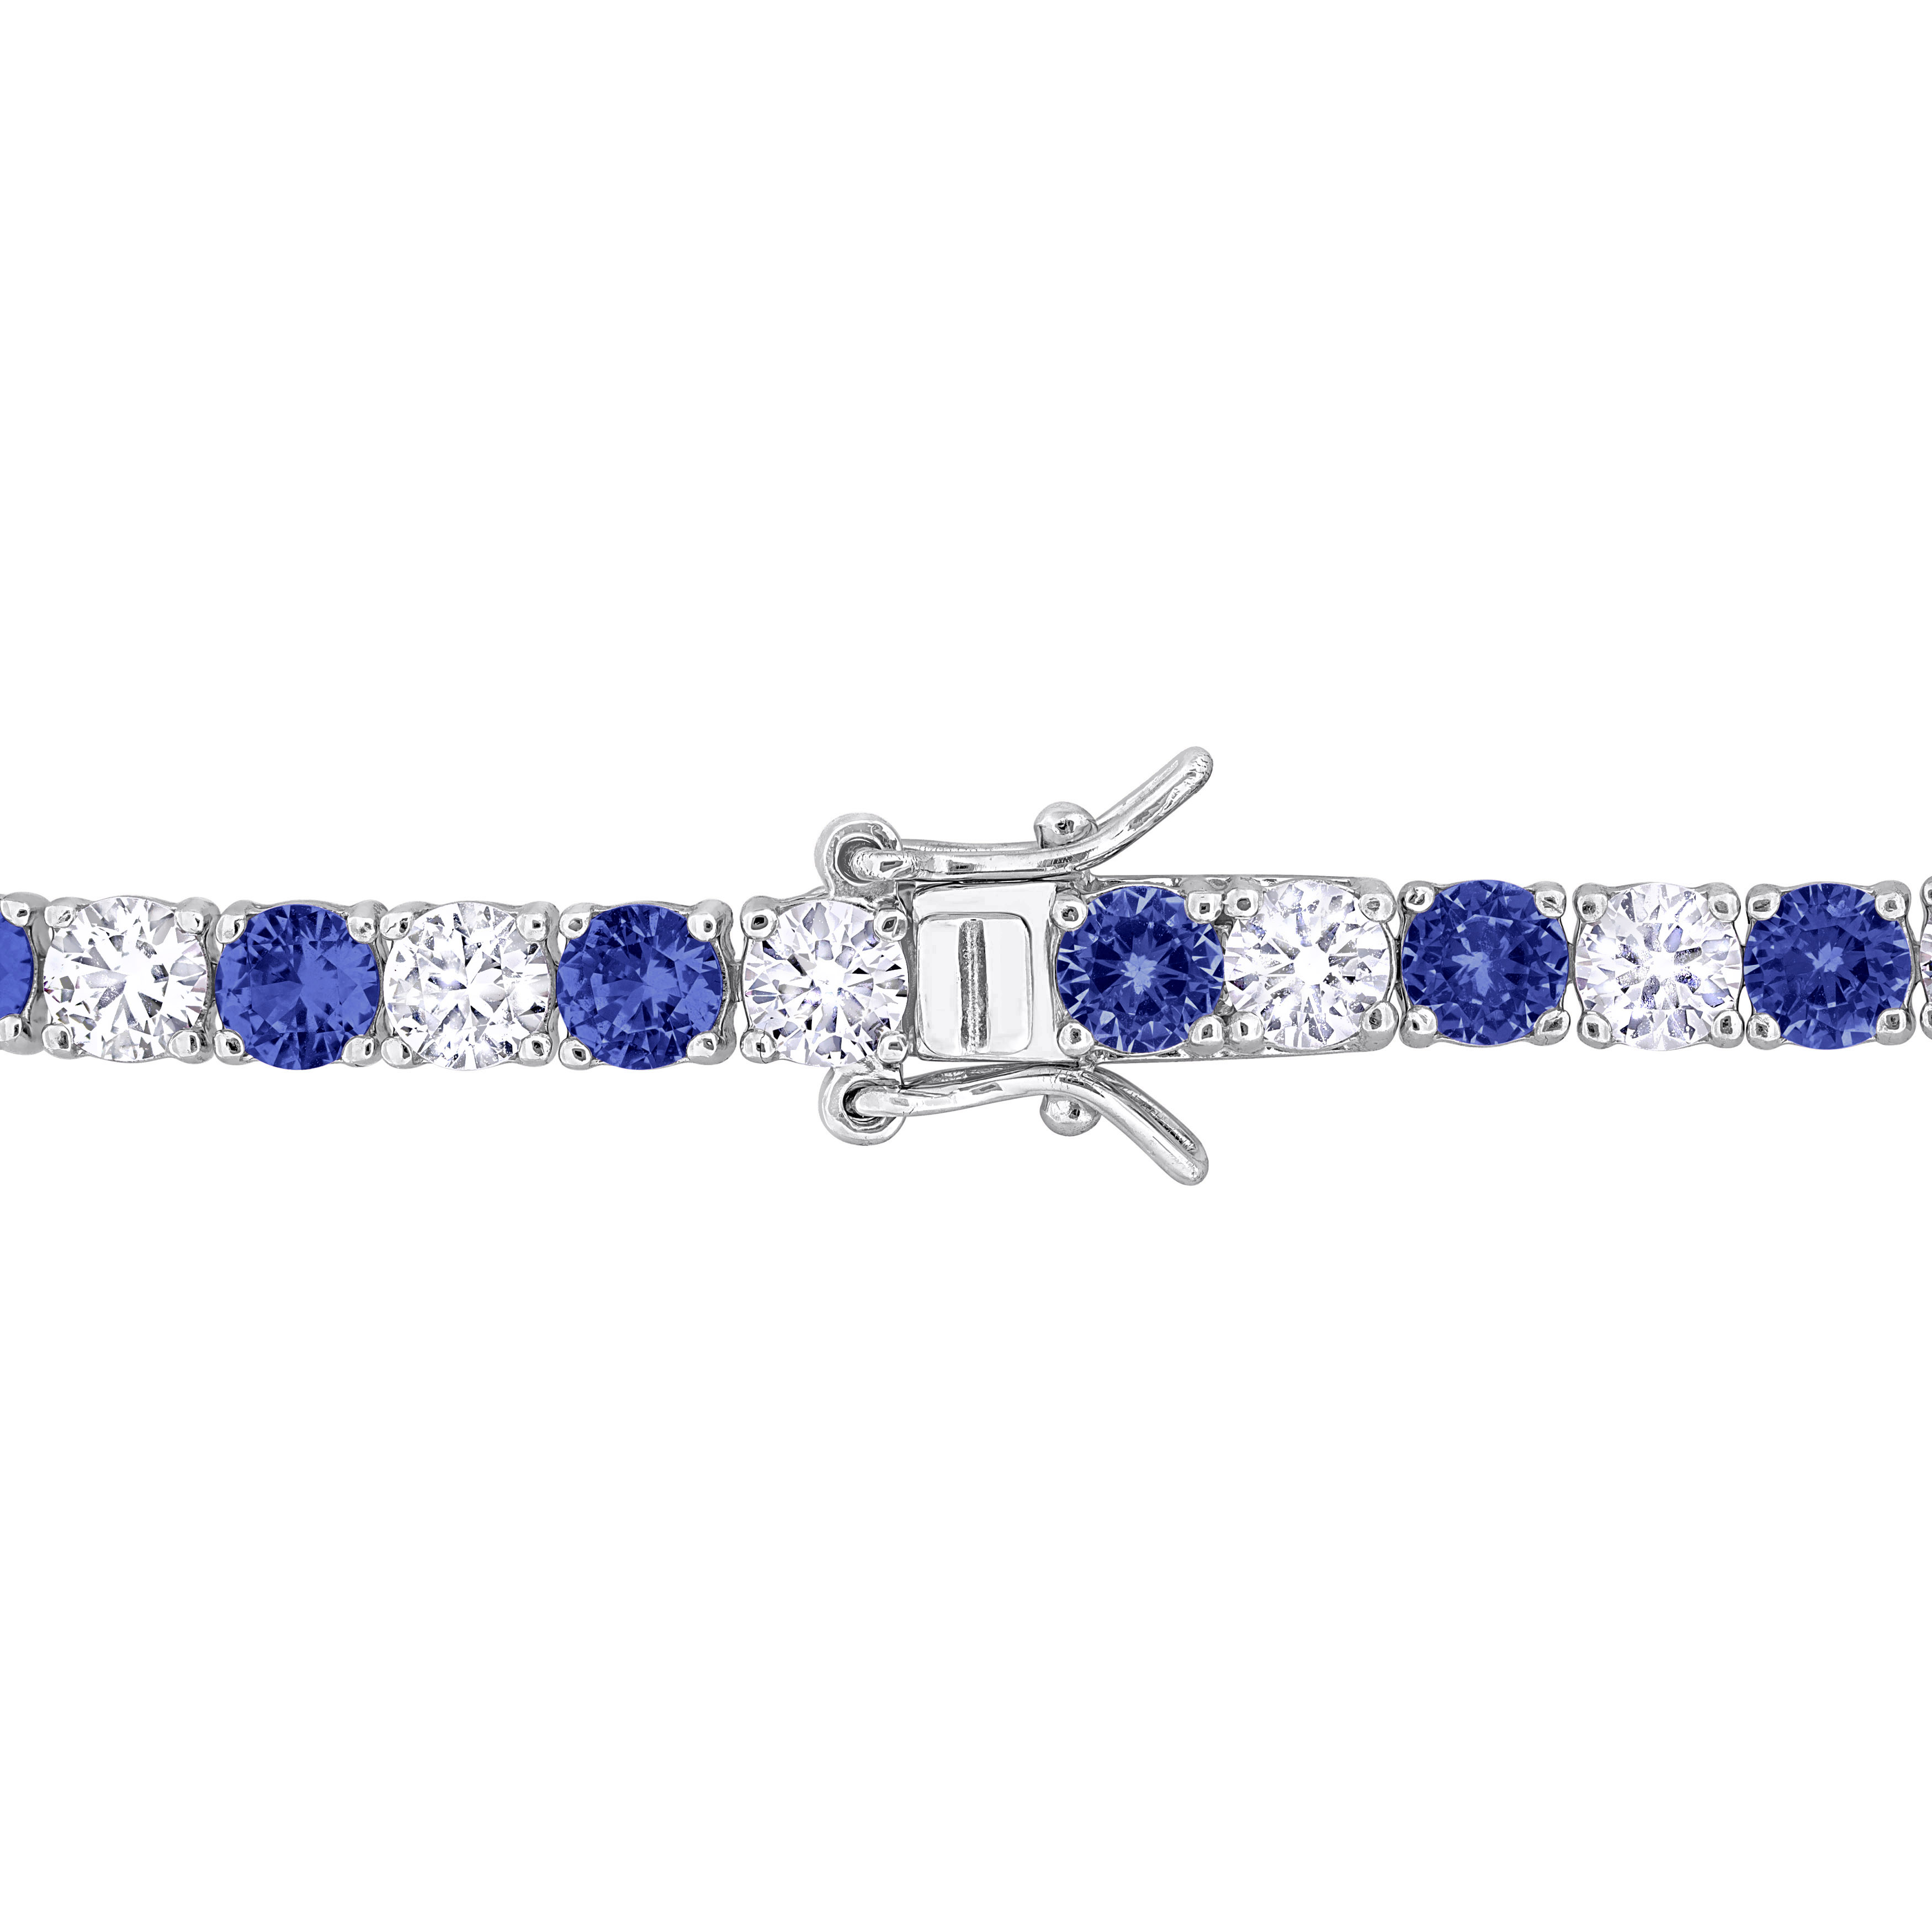 14 1/4 CT TGW Created Blue and White Sapphire Bracelet in Sterling Silver - 7.25 in.